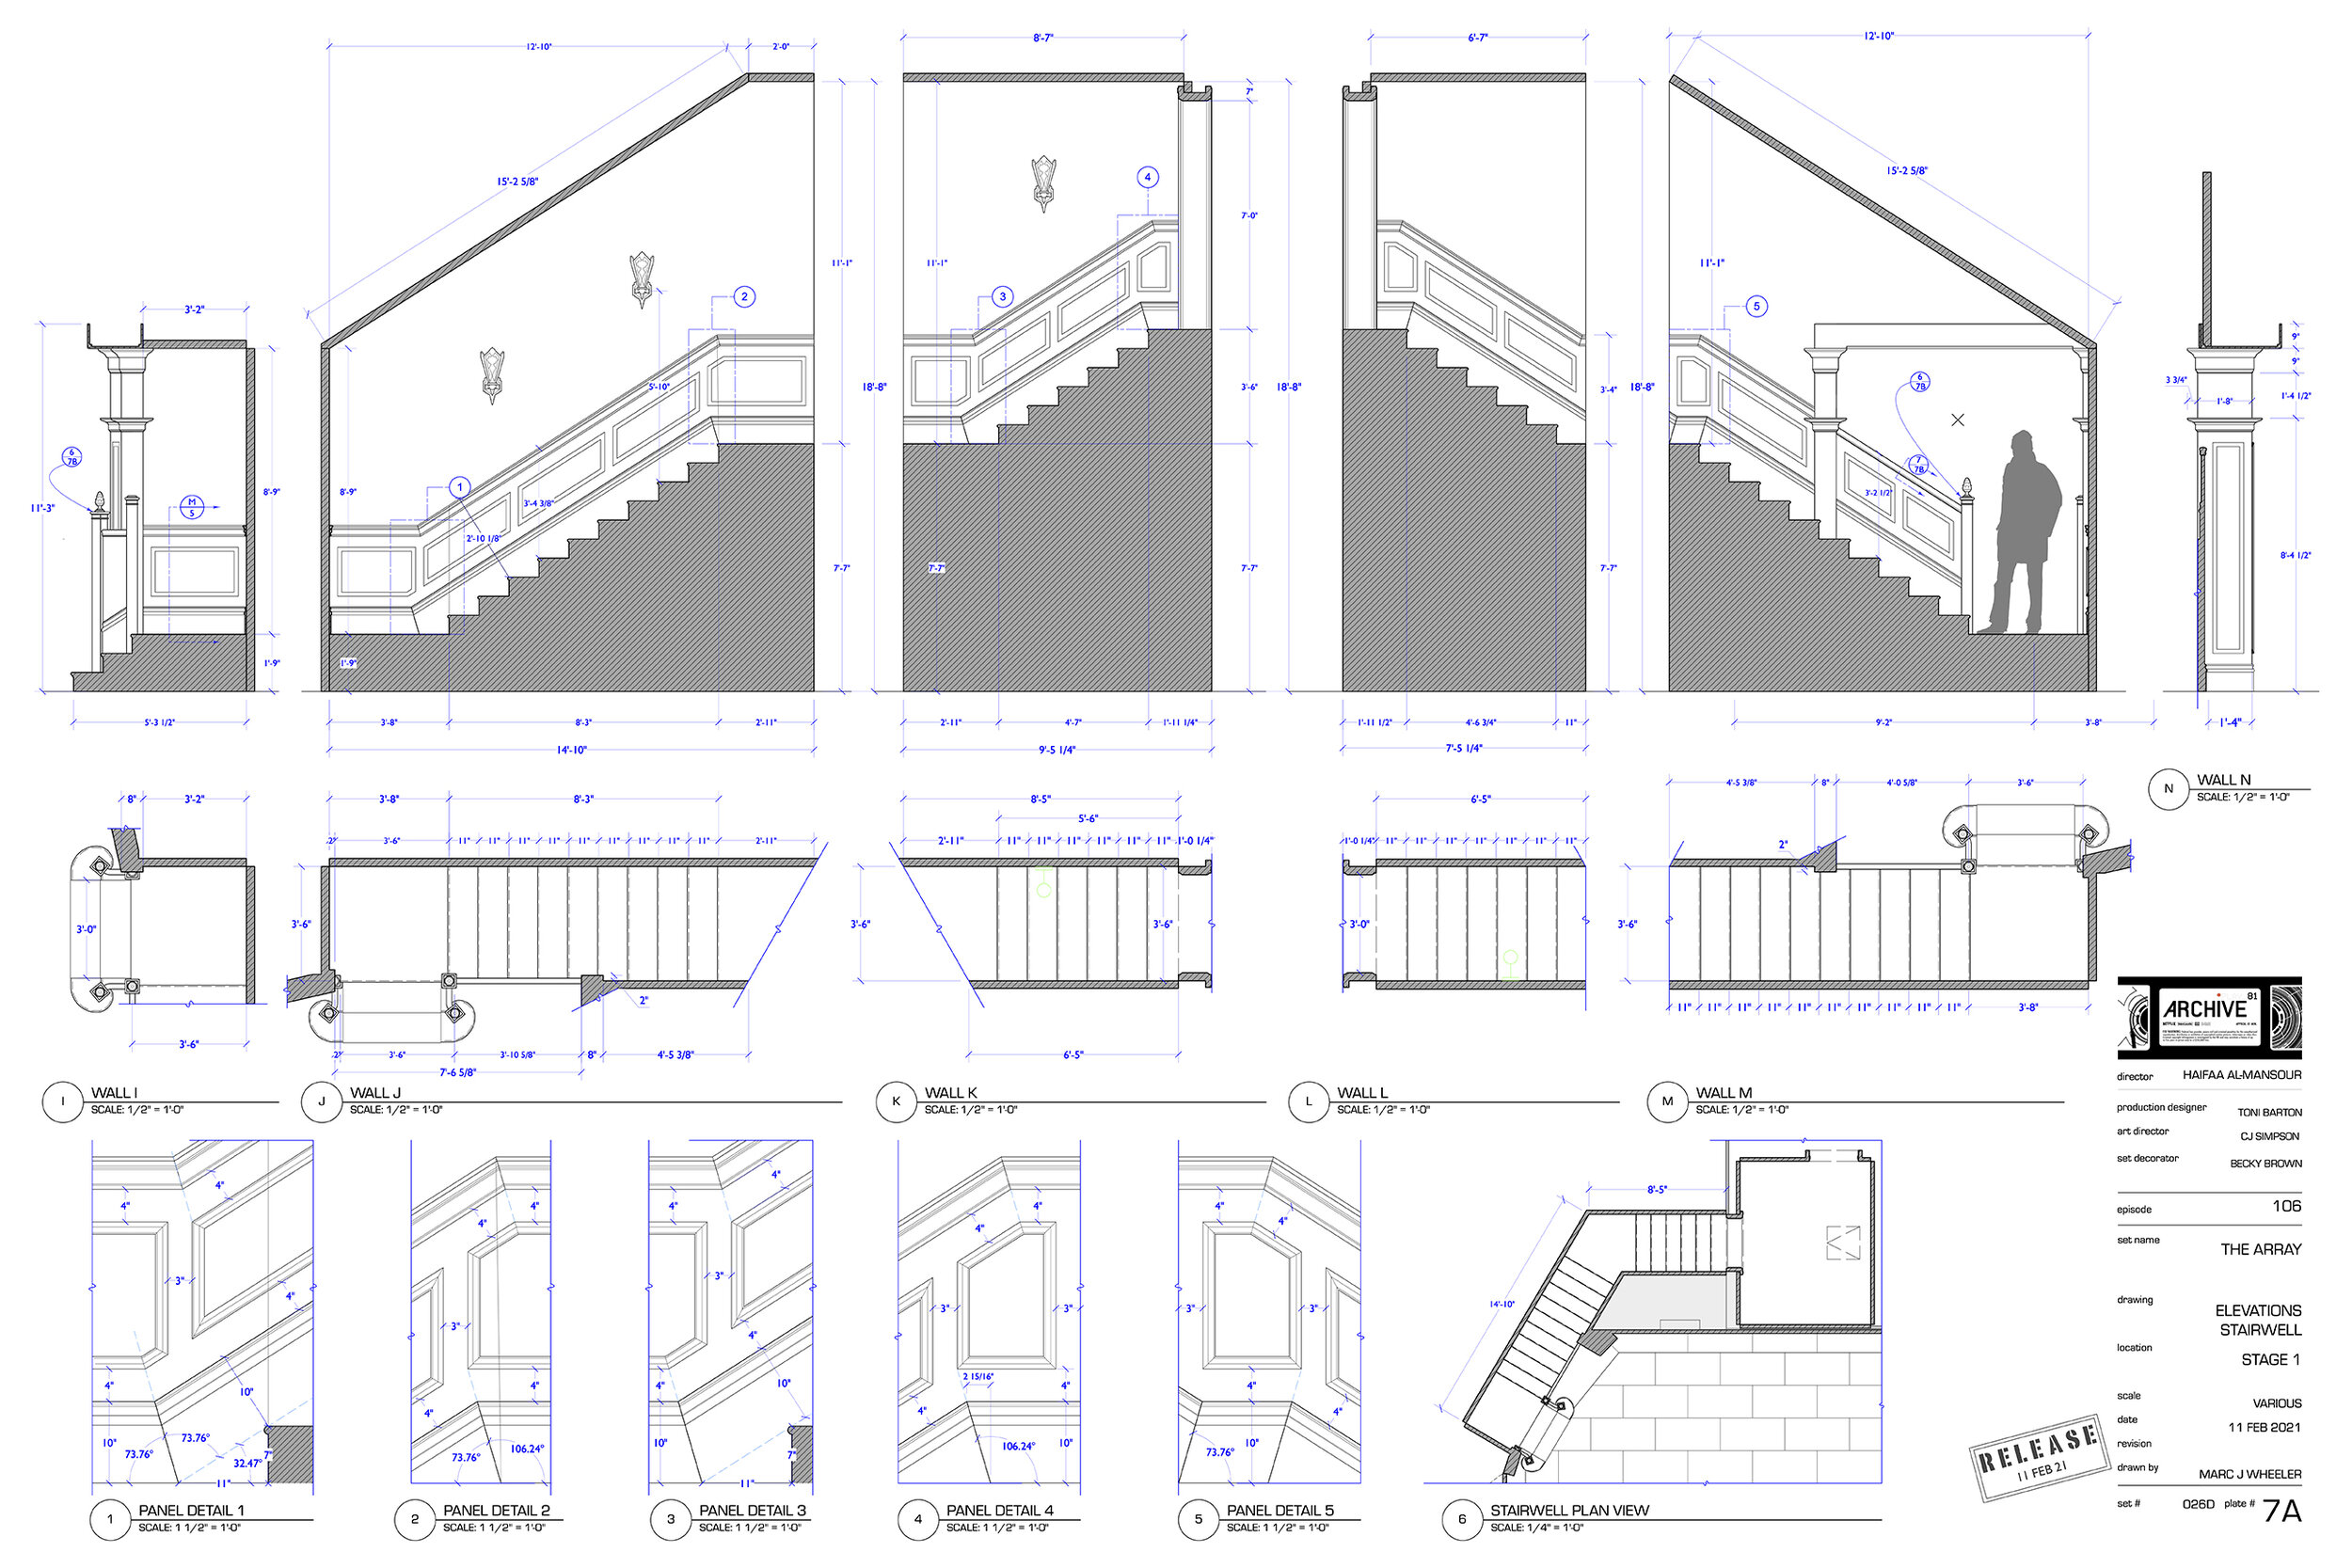 A81 106-026D-7a ELEVATION I-N STAIRWELL copy.jpg